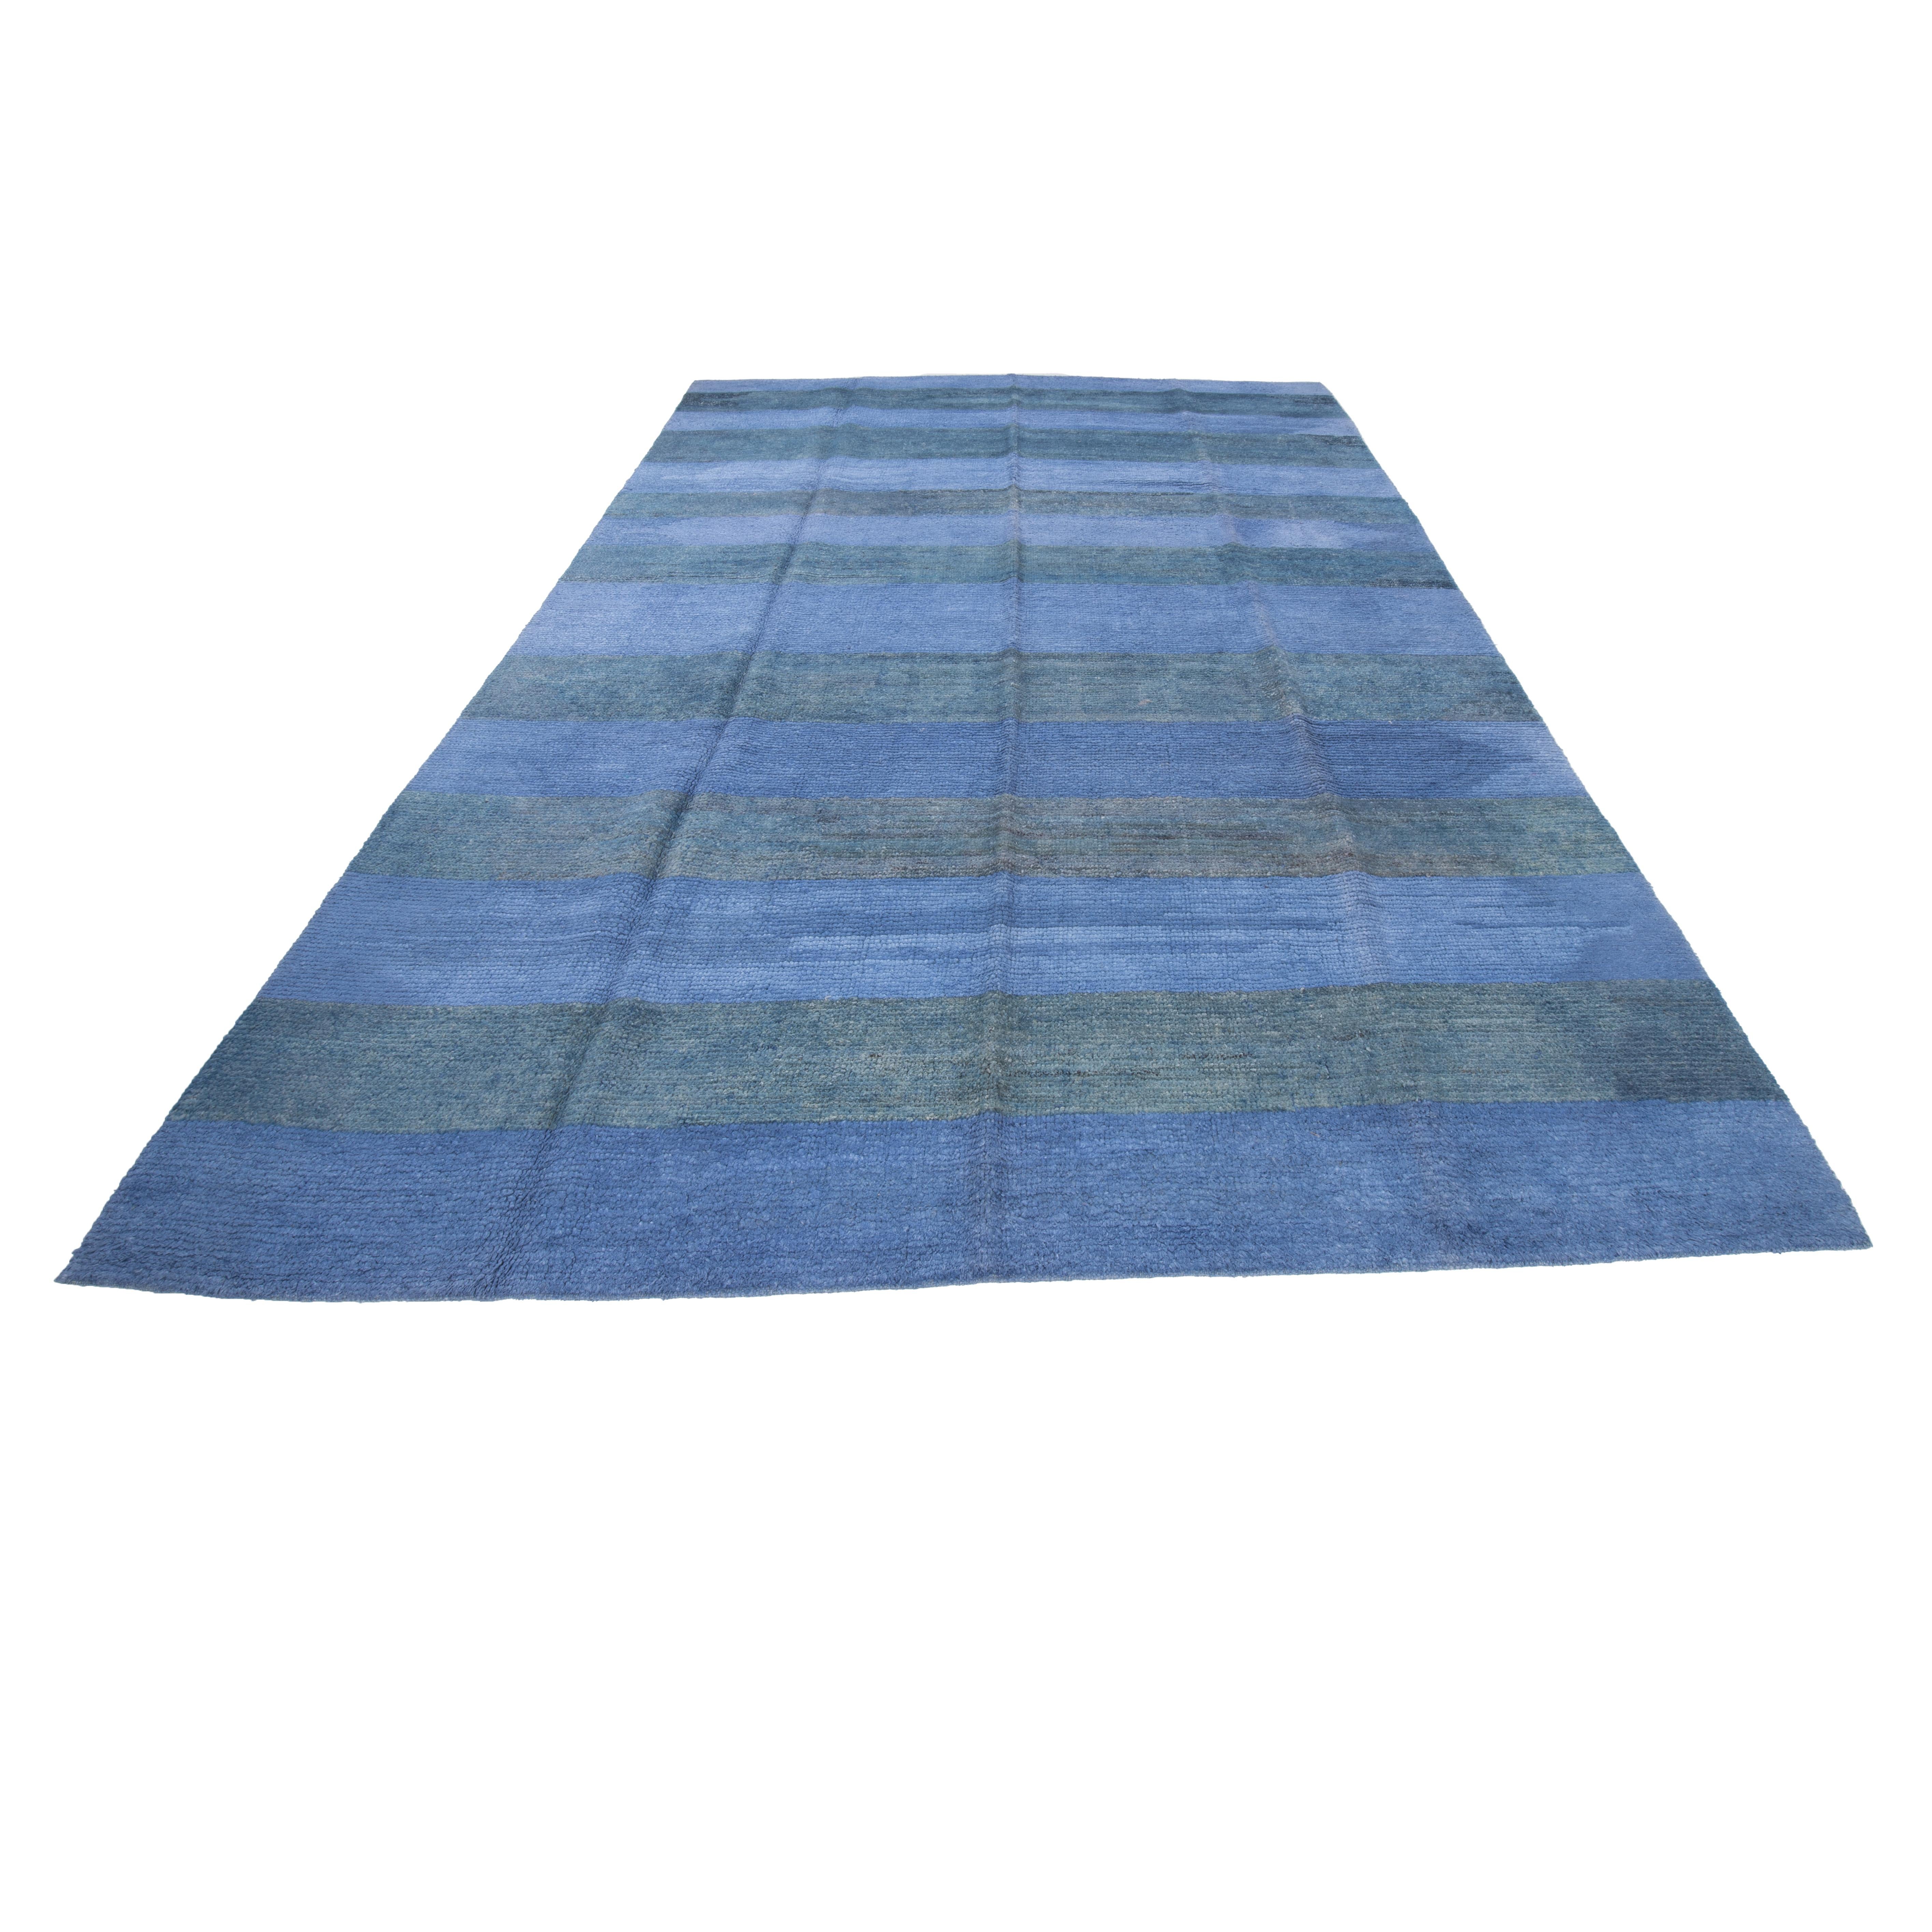 Measures: 8’7” x 11’10”
Contemporary Turkish rugs made with recycled wool are an excellent example of sustainable and eco-friendly home decor. These rugs are made using recycled wool yarn, which is obtained from various vintage, old and heavily